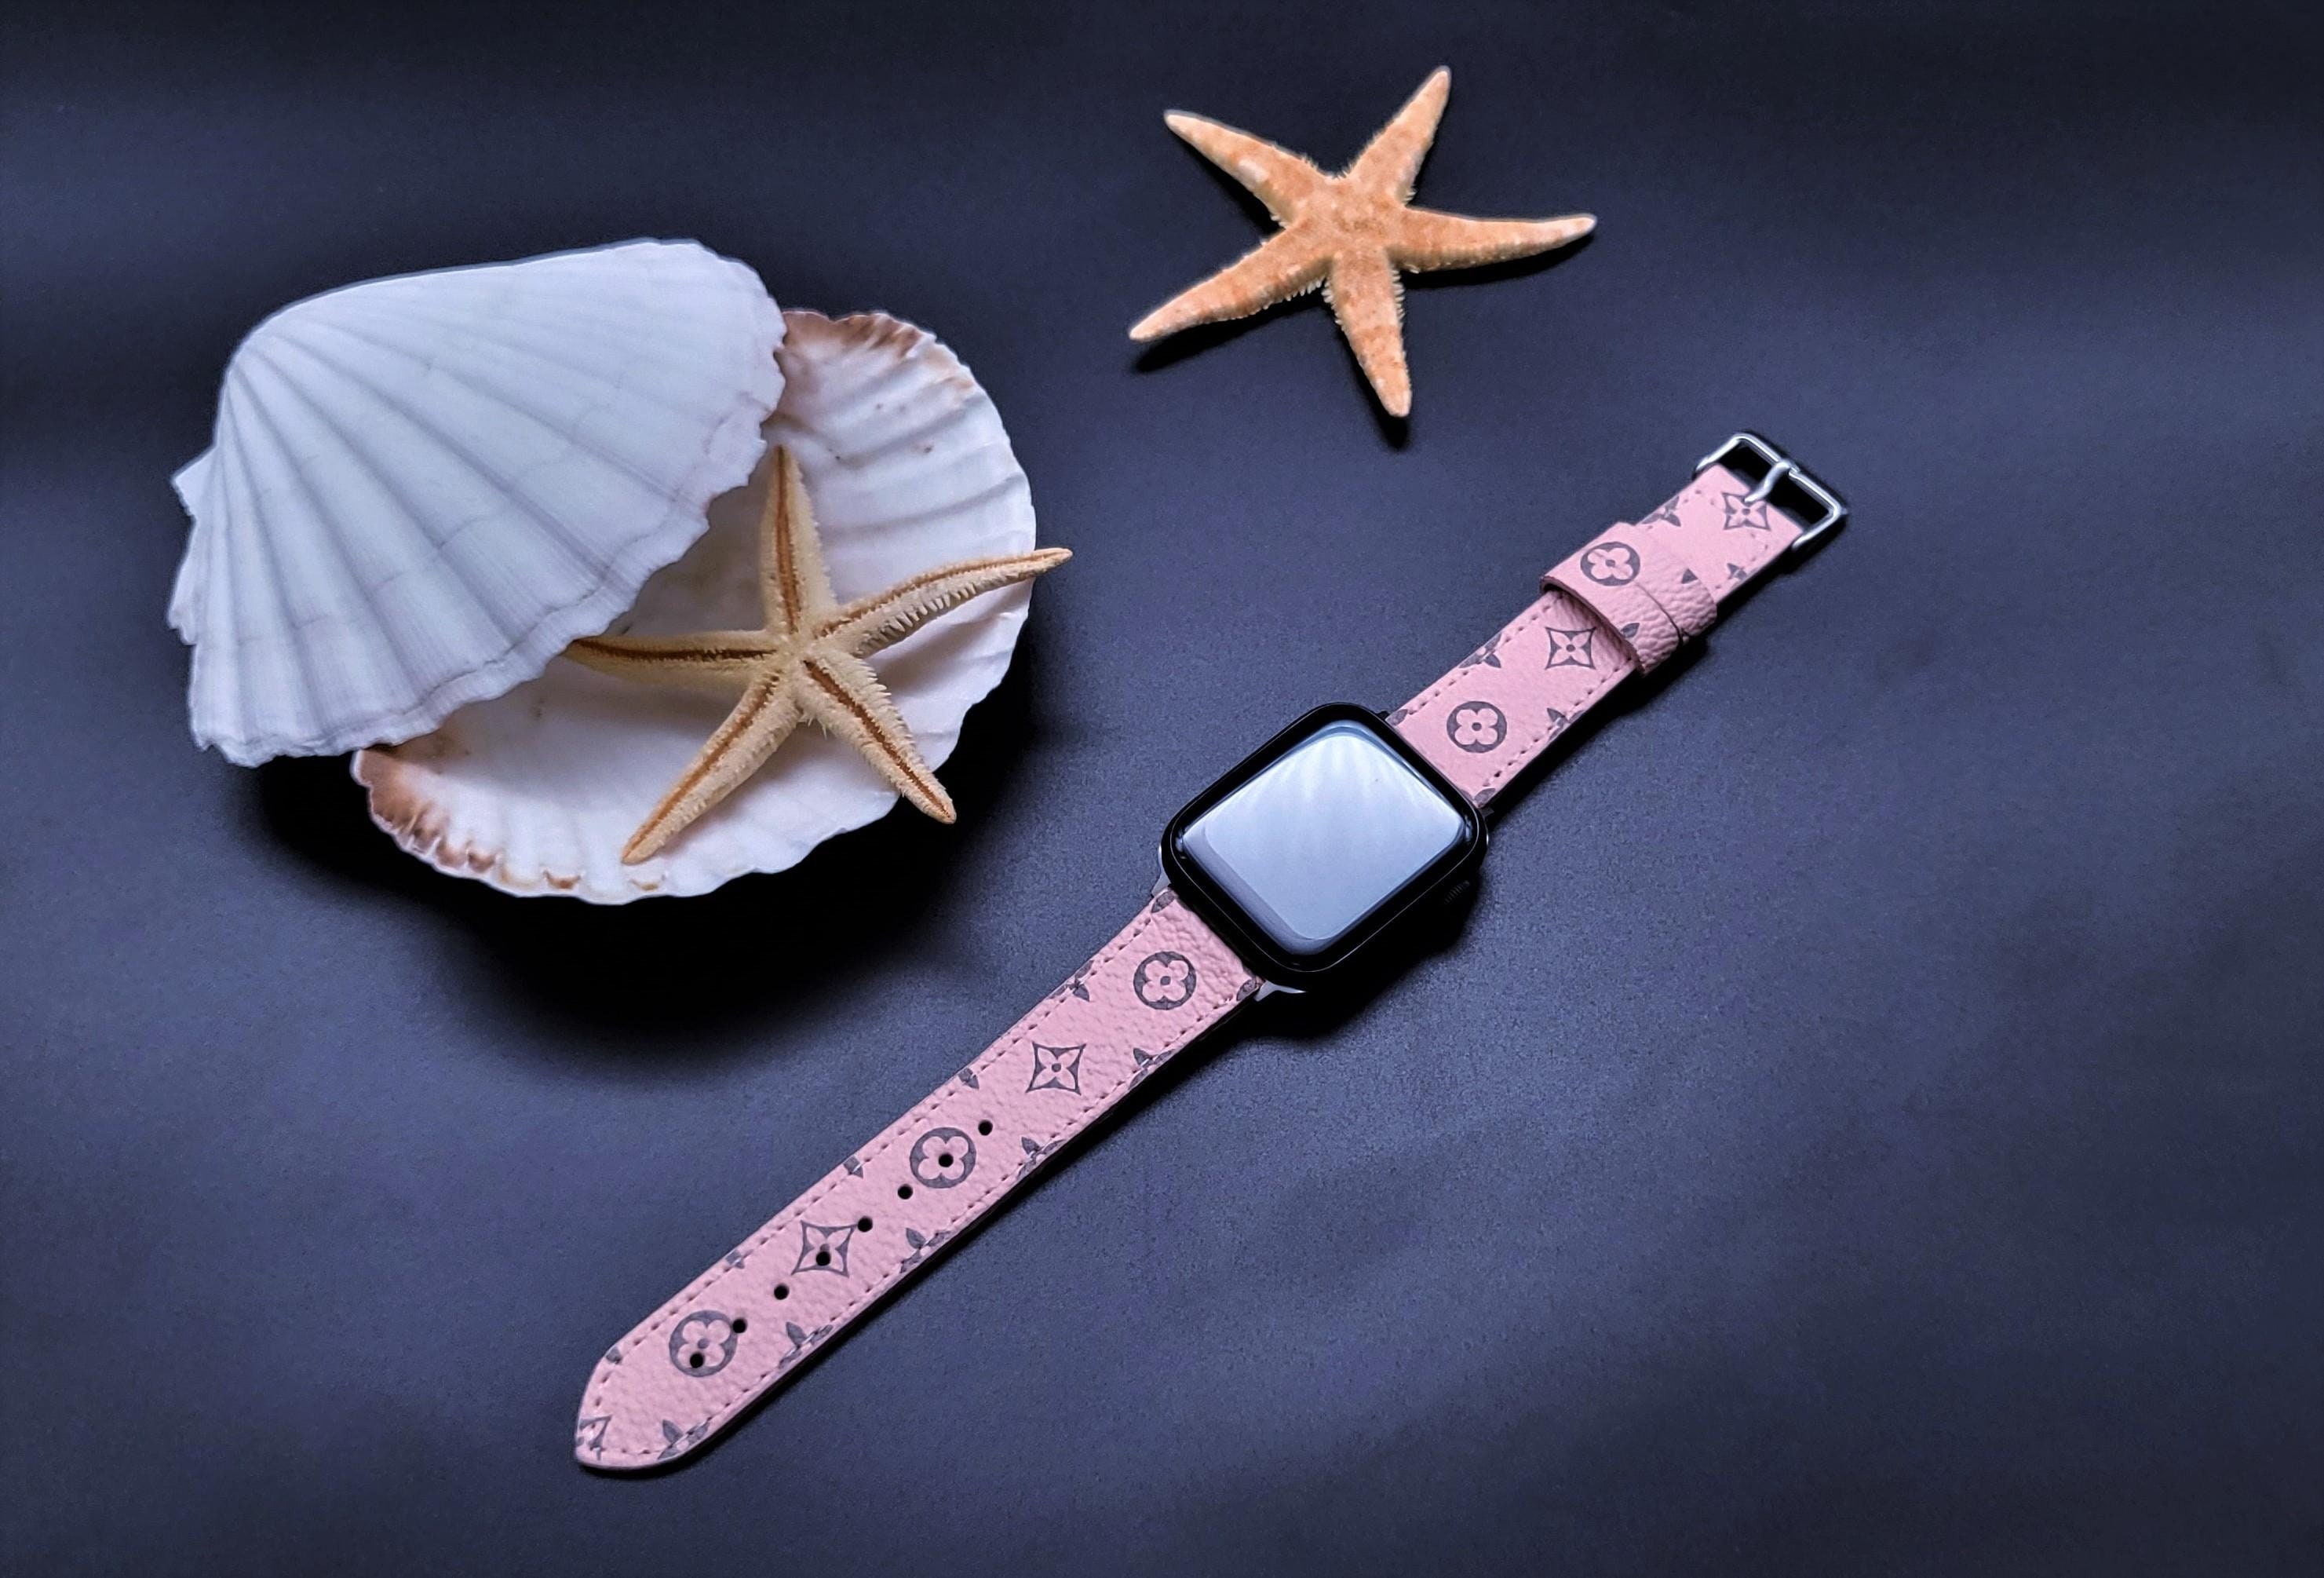 Raindrop Handmade Louis Vuitton for Apple Watch Series  1,2,3,4,5,6,7,8,Ultra,SE Strap Band LV 26 – Limited Edition